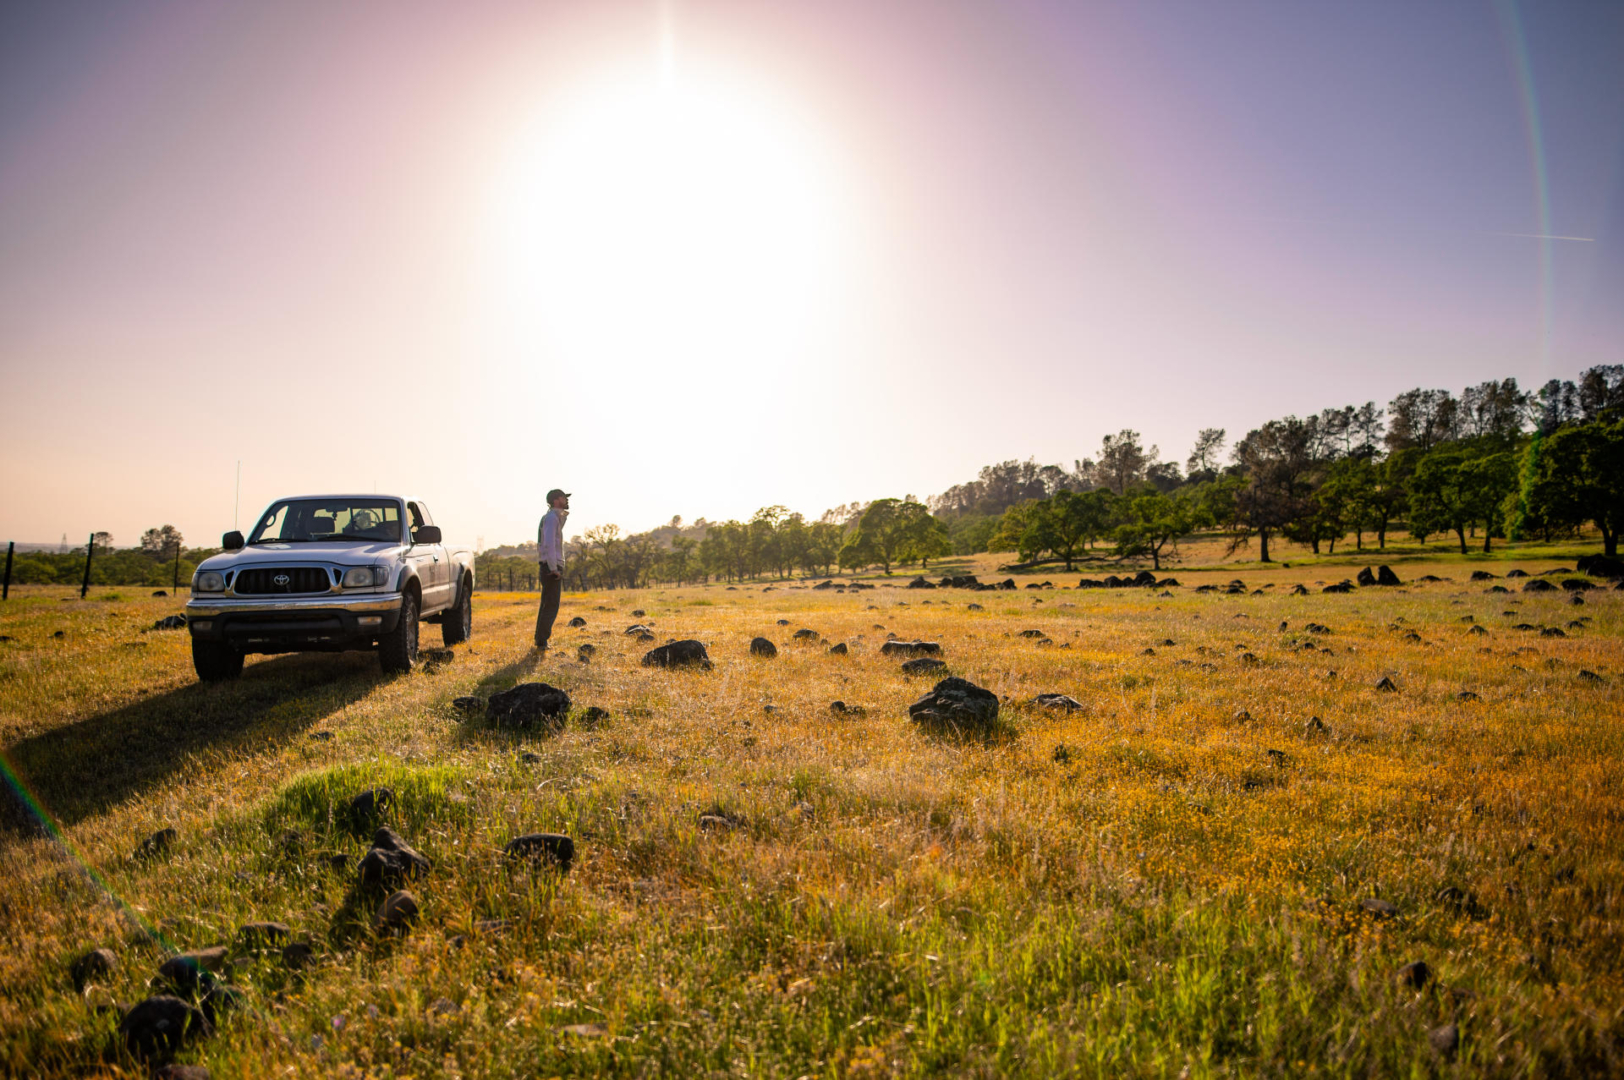 Eli Goodsell stands to the side of a truck among rocks jutting out of the grassy ground, with trees in the background and the sun beginning to set.